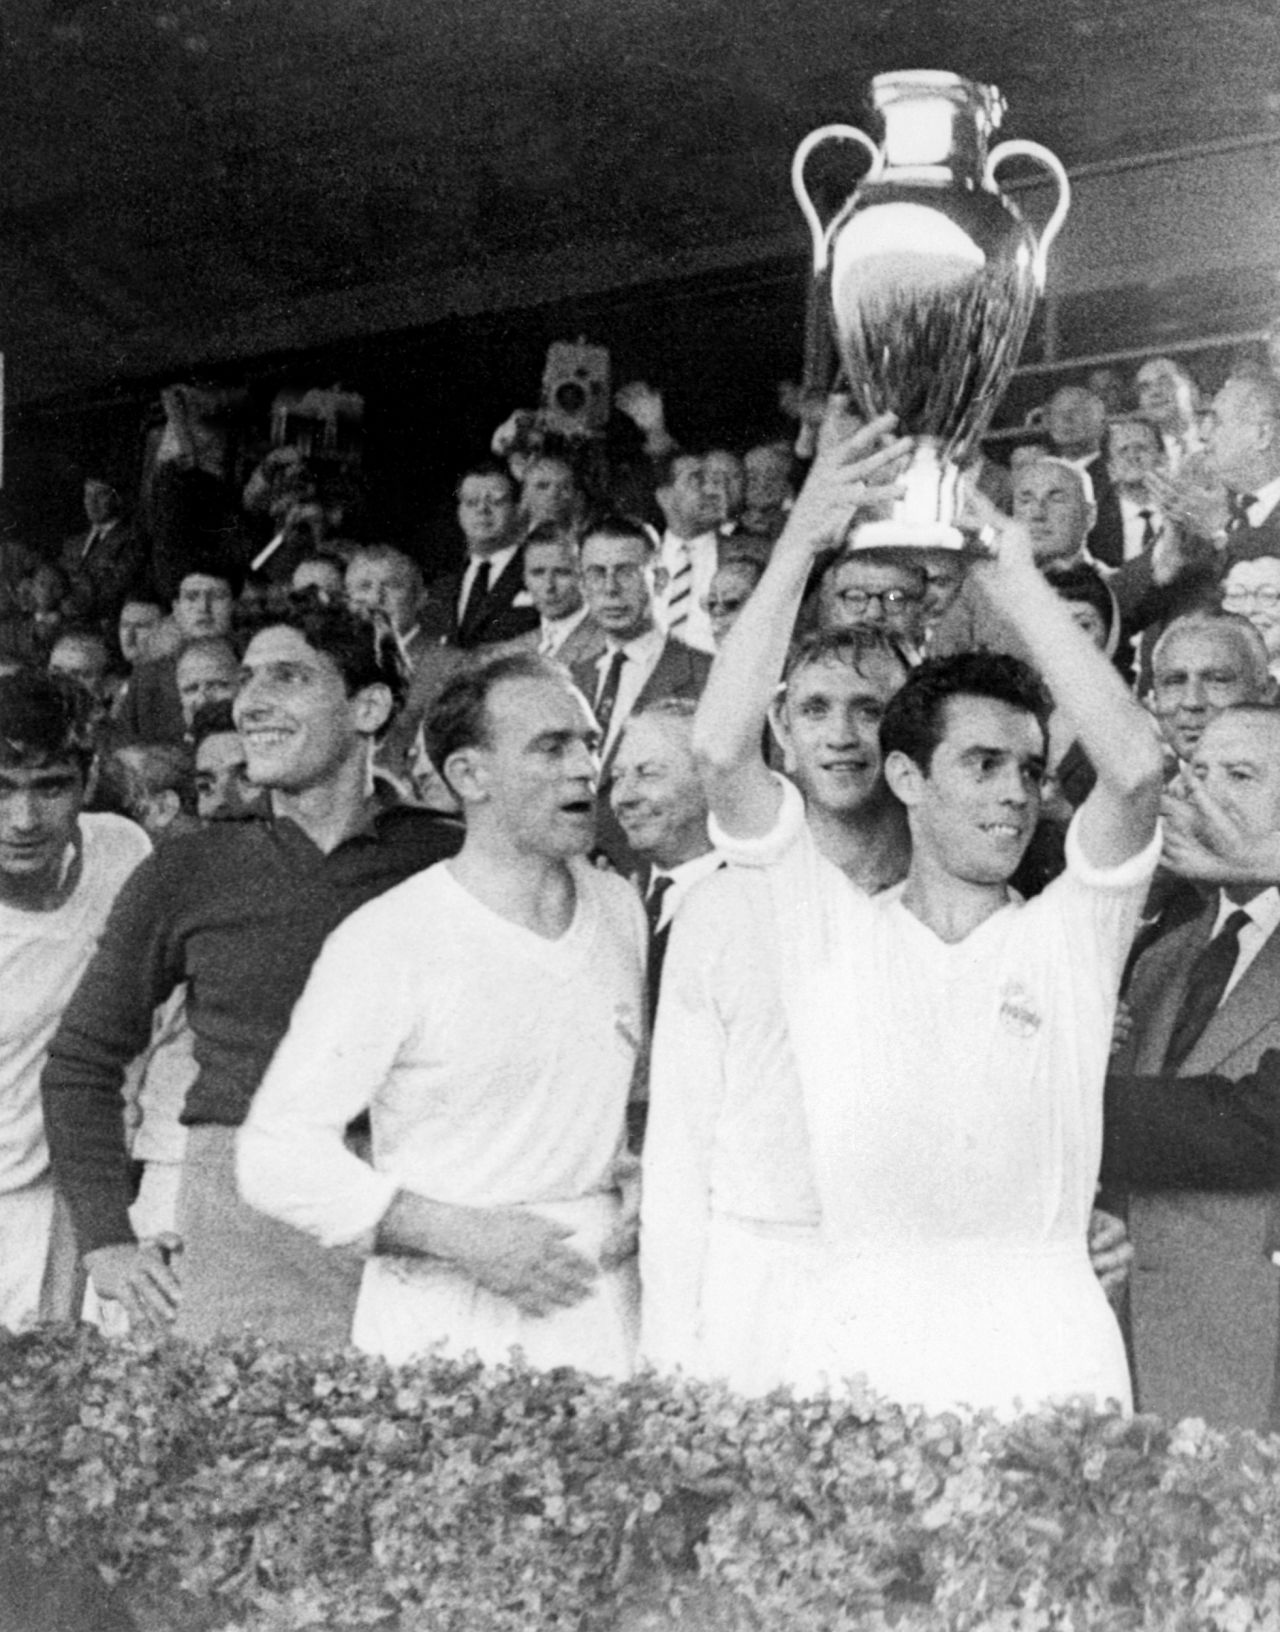 Real's European pedigree is unrivaled, having won the continent's top club competition on a record nine occasions since 1956. Captain Jose Santamaria is pictured here lifting the European Cup after Real's win against French team Stade de Reims in 1959.